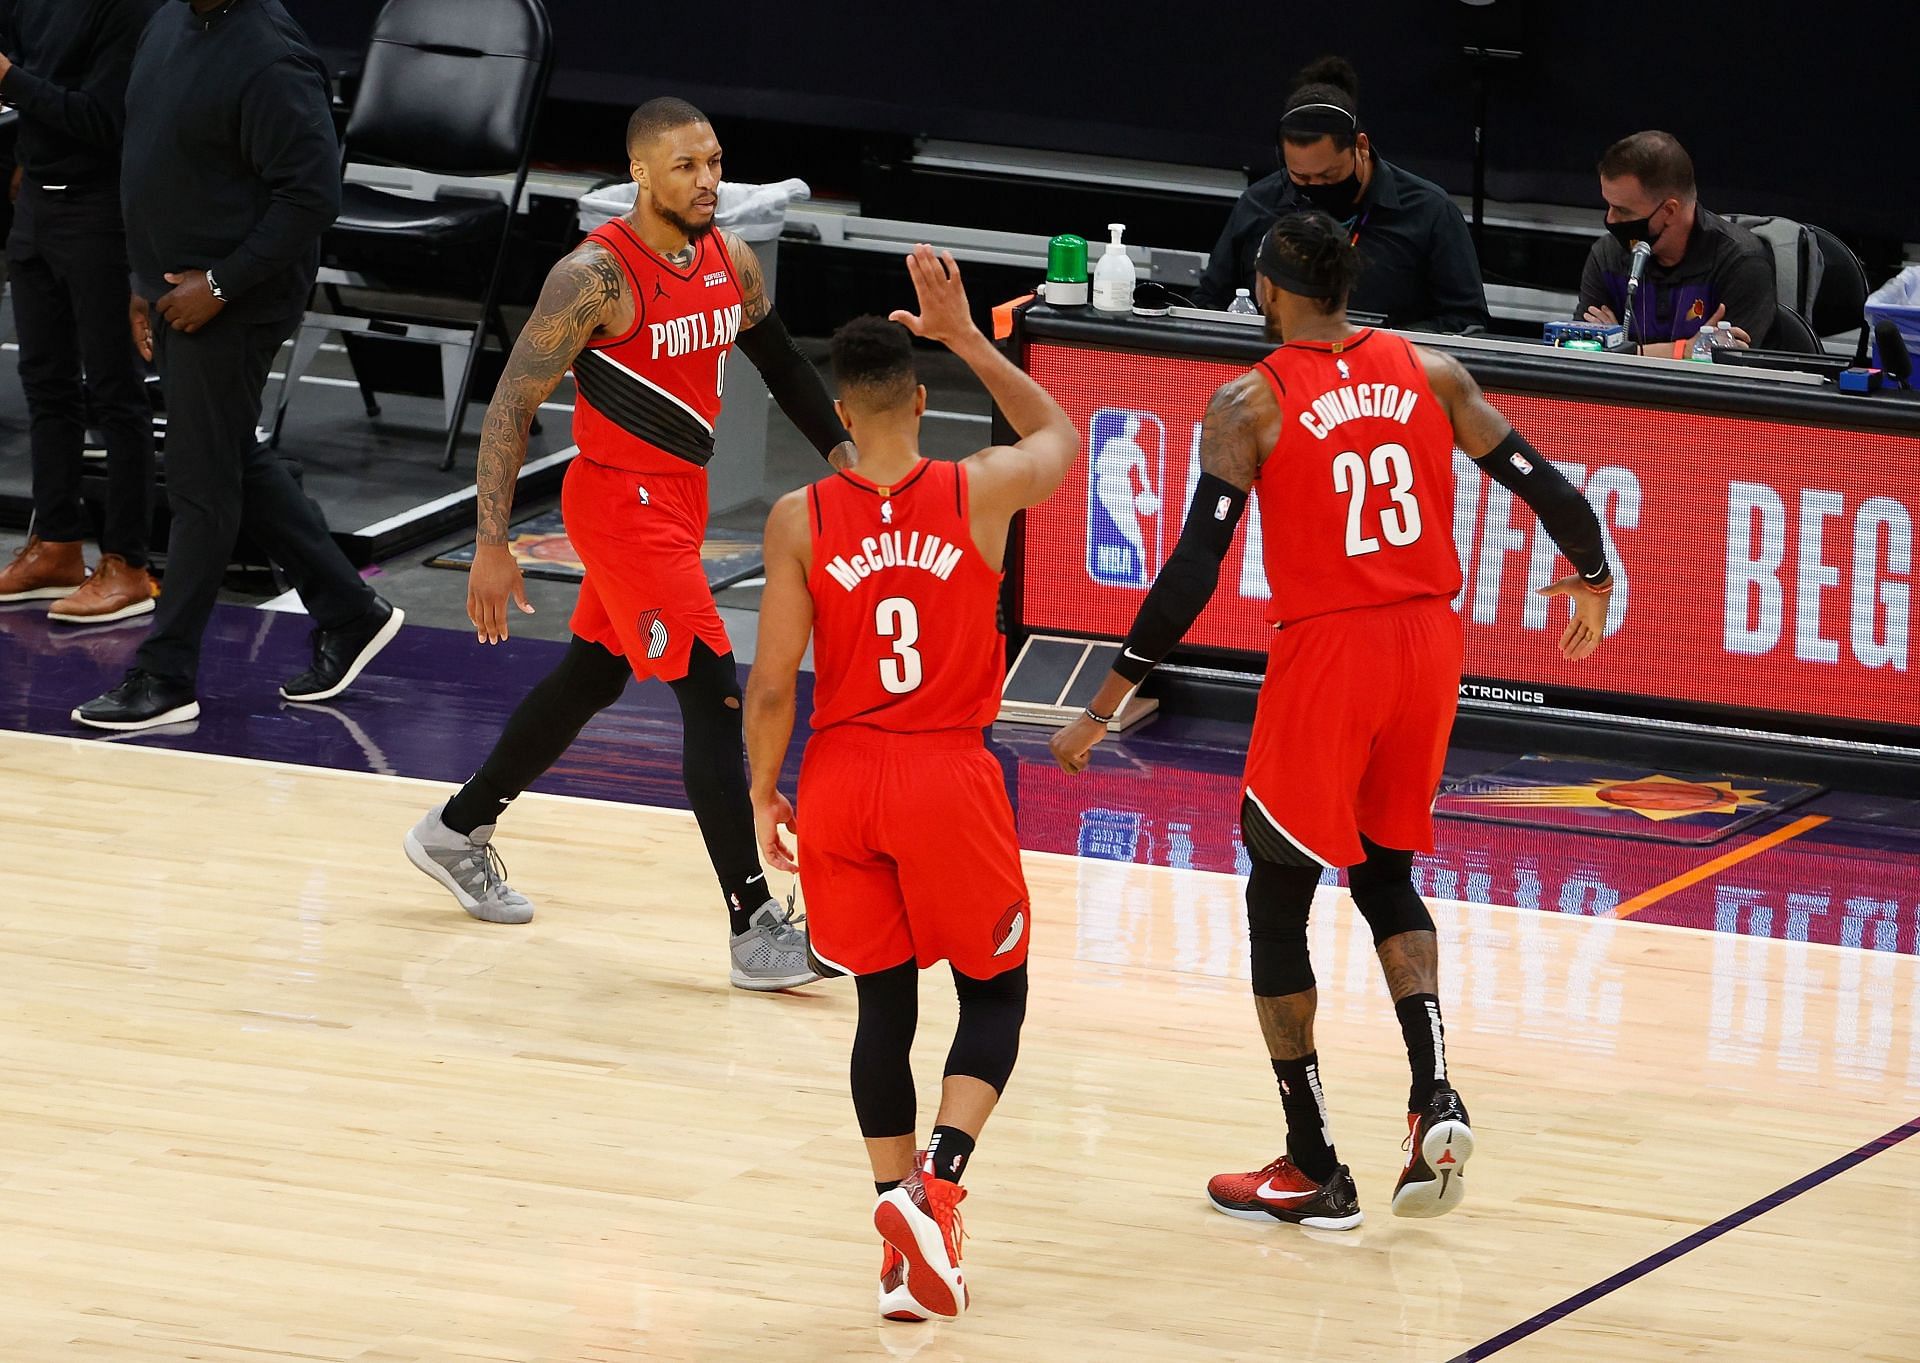 The Portland Trail Blazers in action.